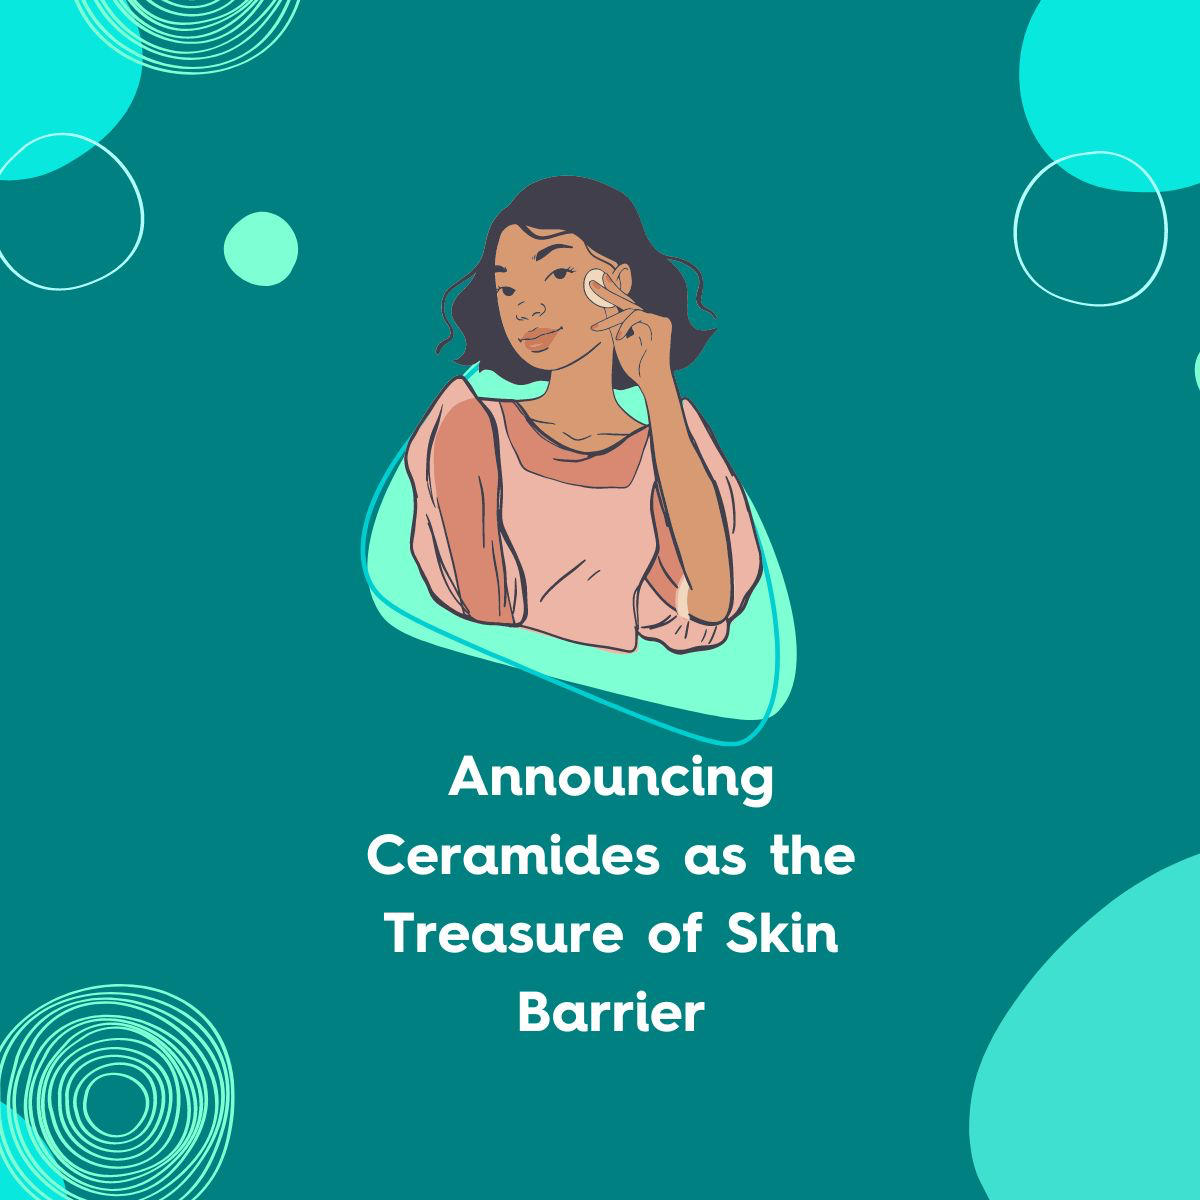 Announcing Ceramides as the Treasure of Skin Barrier